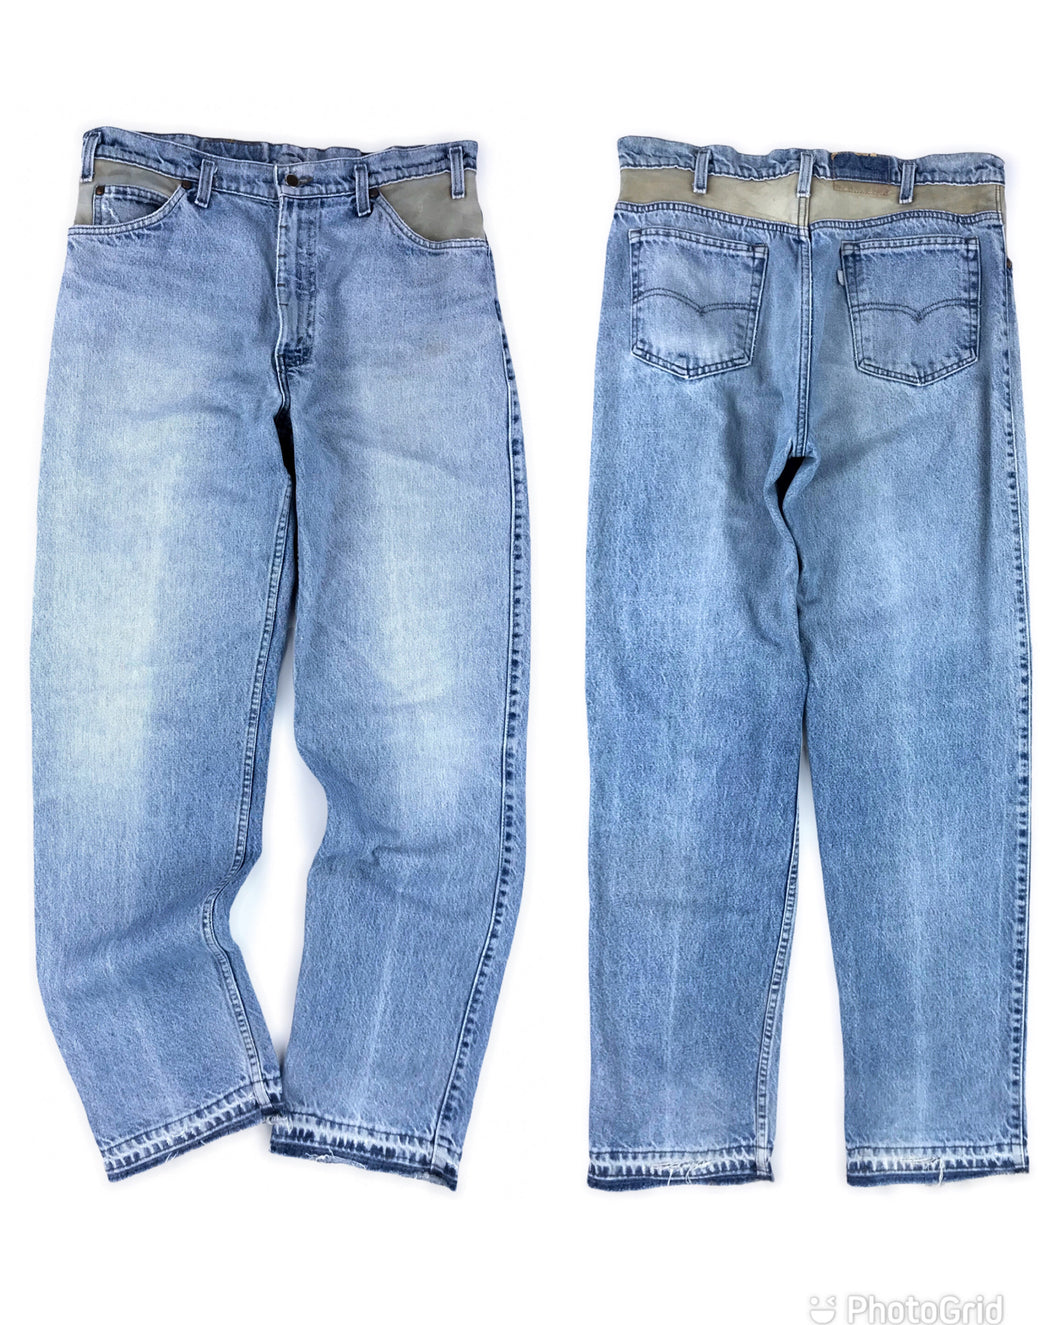 Levi’s “Reworked” Silver Tab Jeans (1990’s)